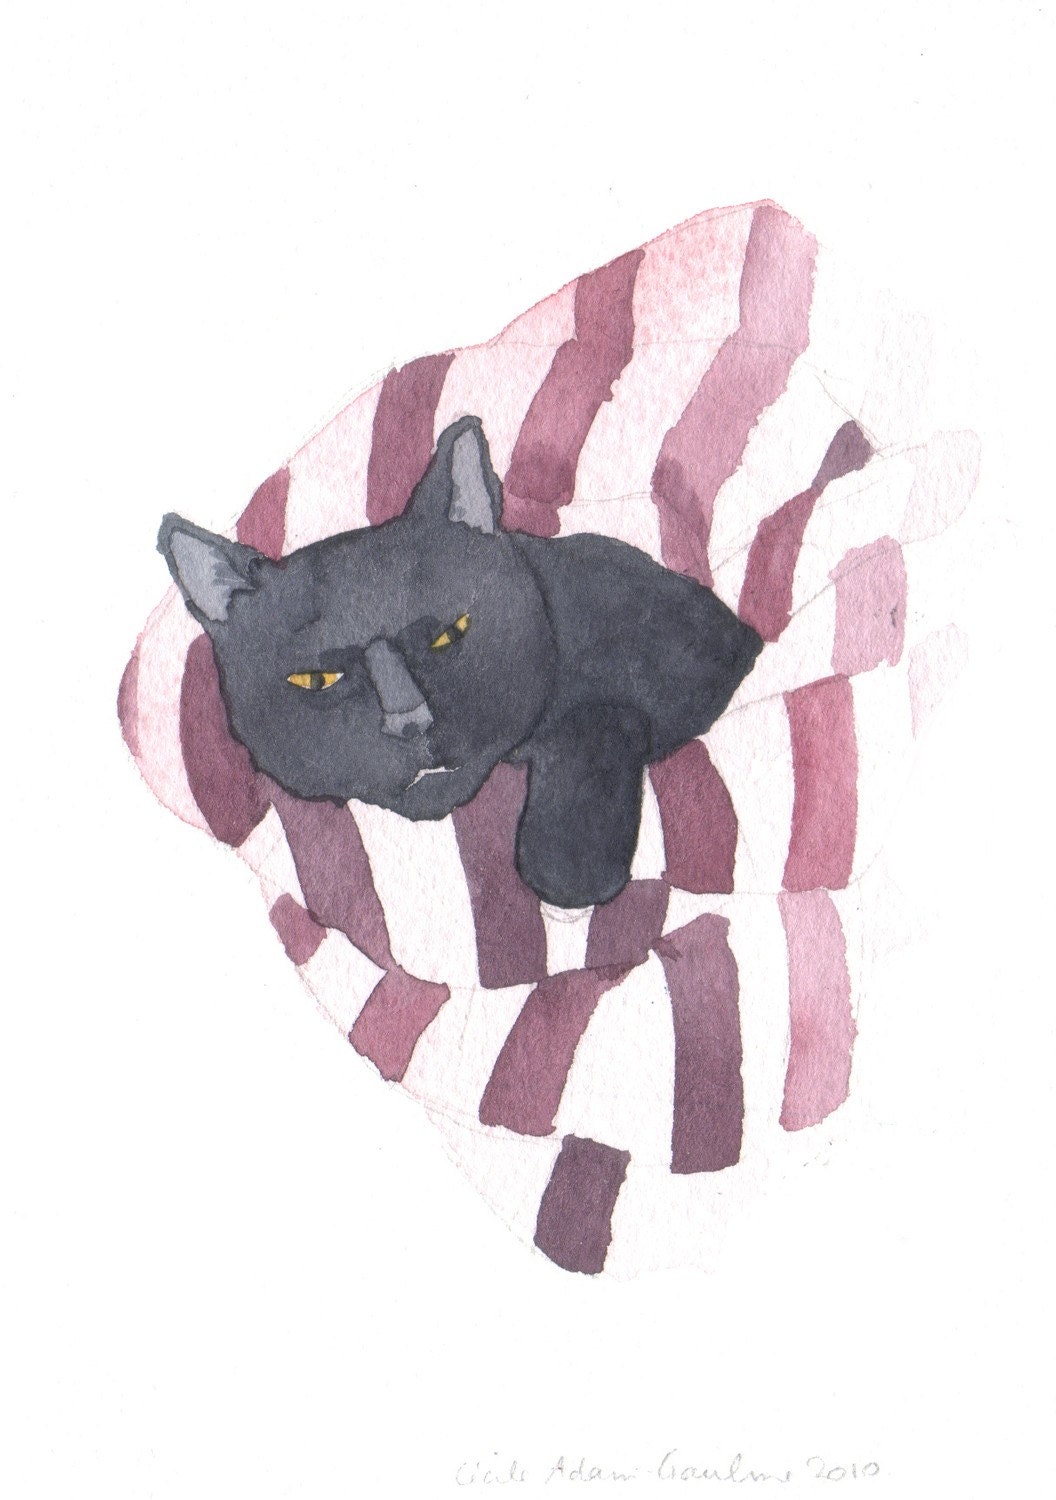 Black Cat in Pinkish Red Stripes Original Watercolor Painting